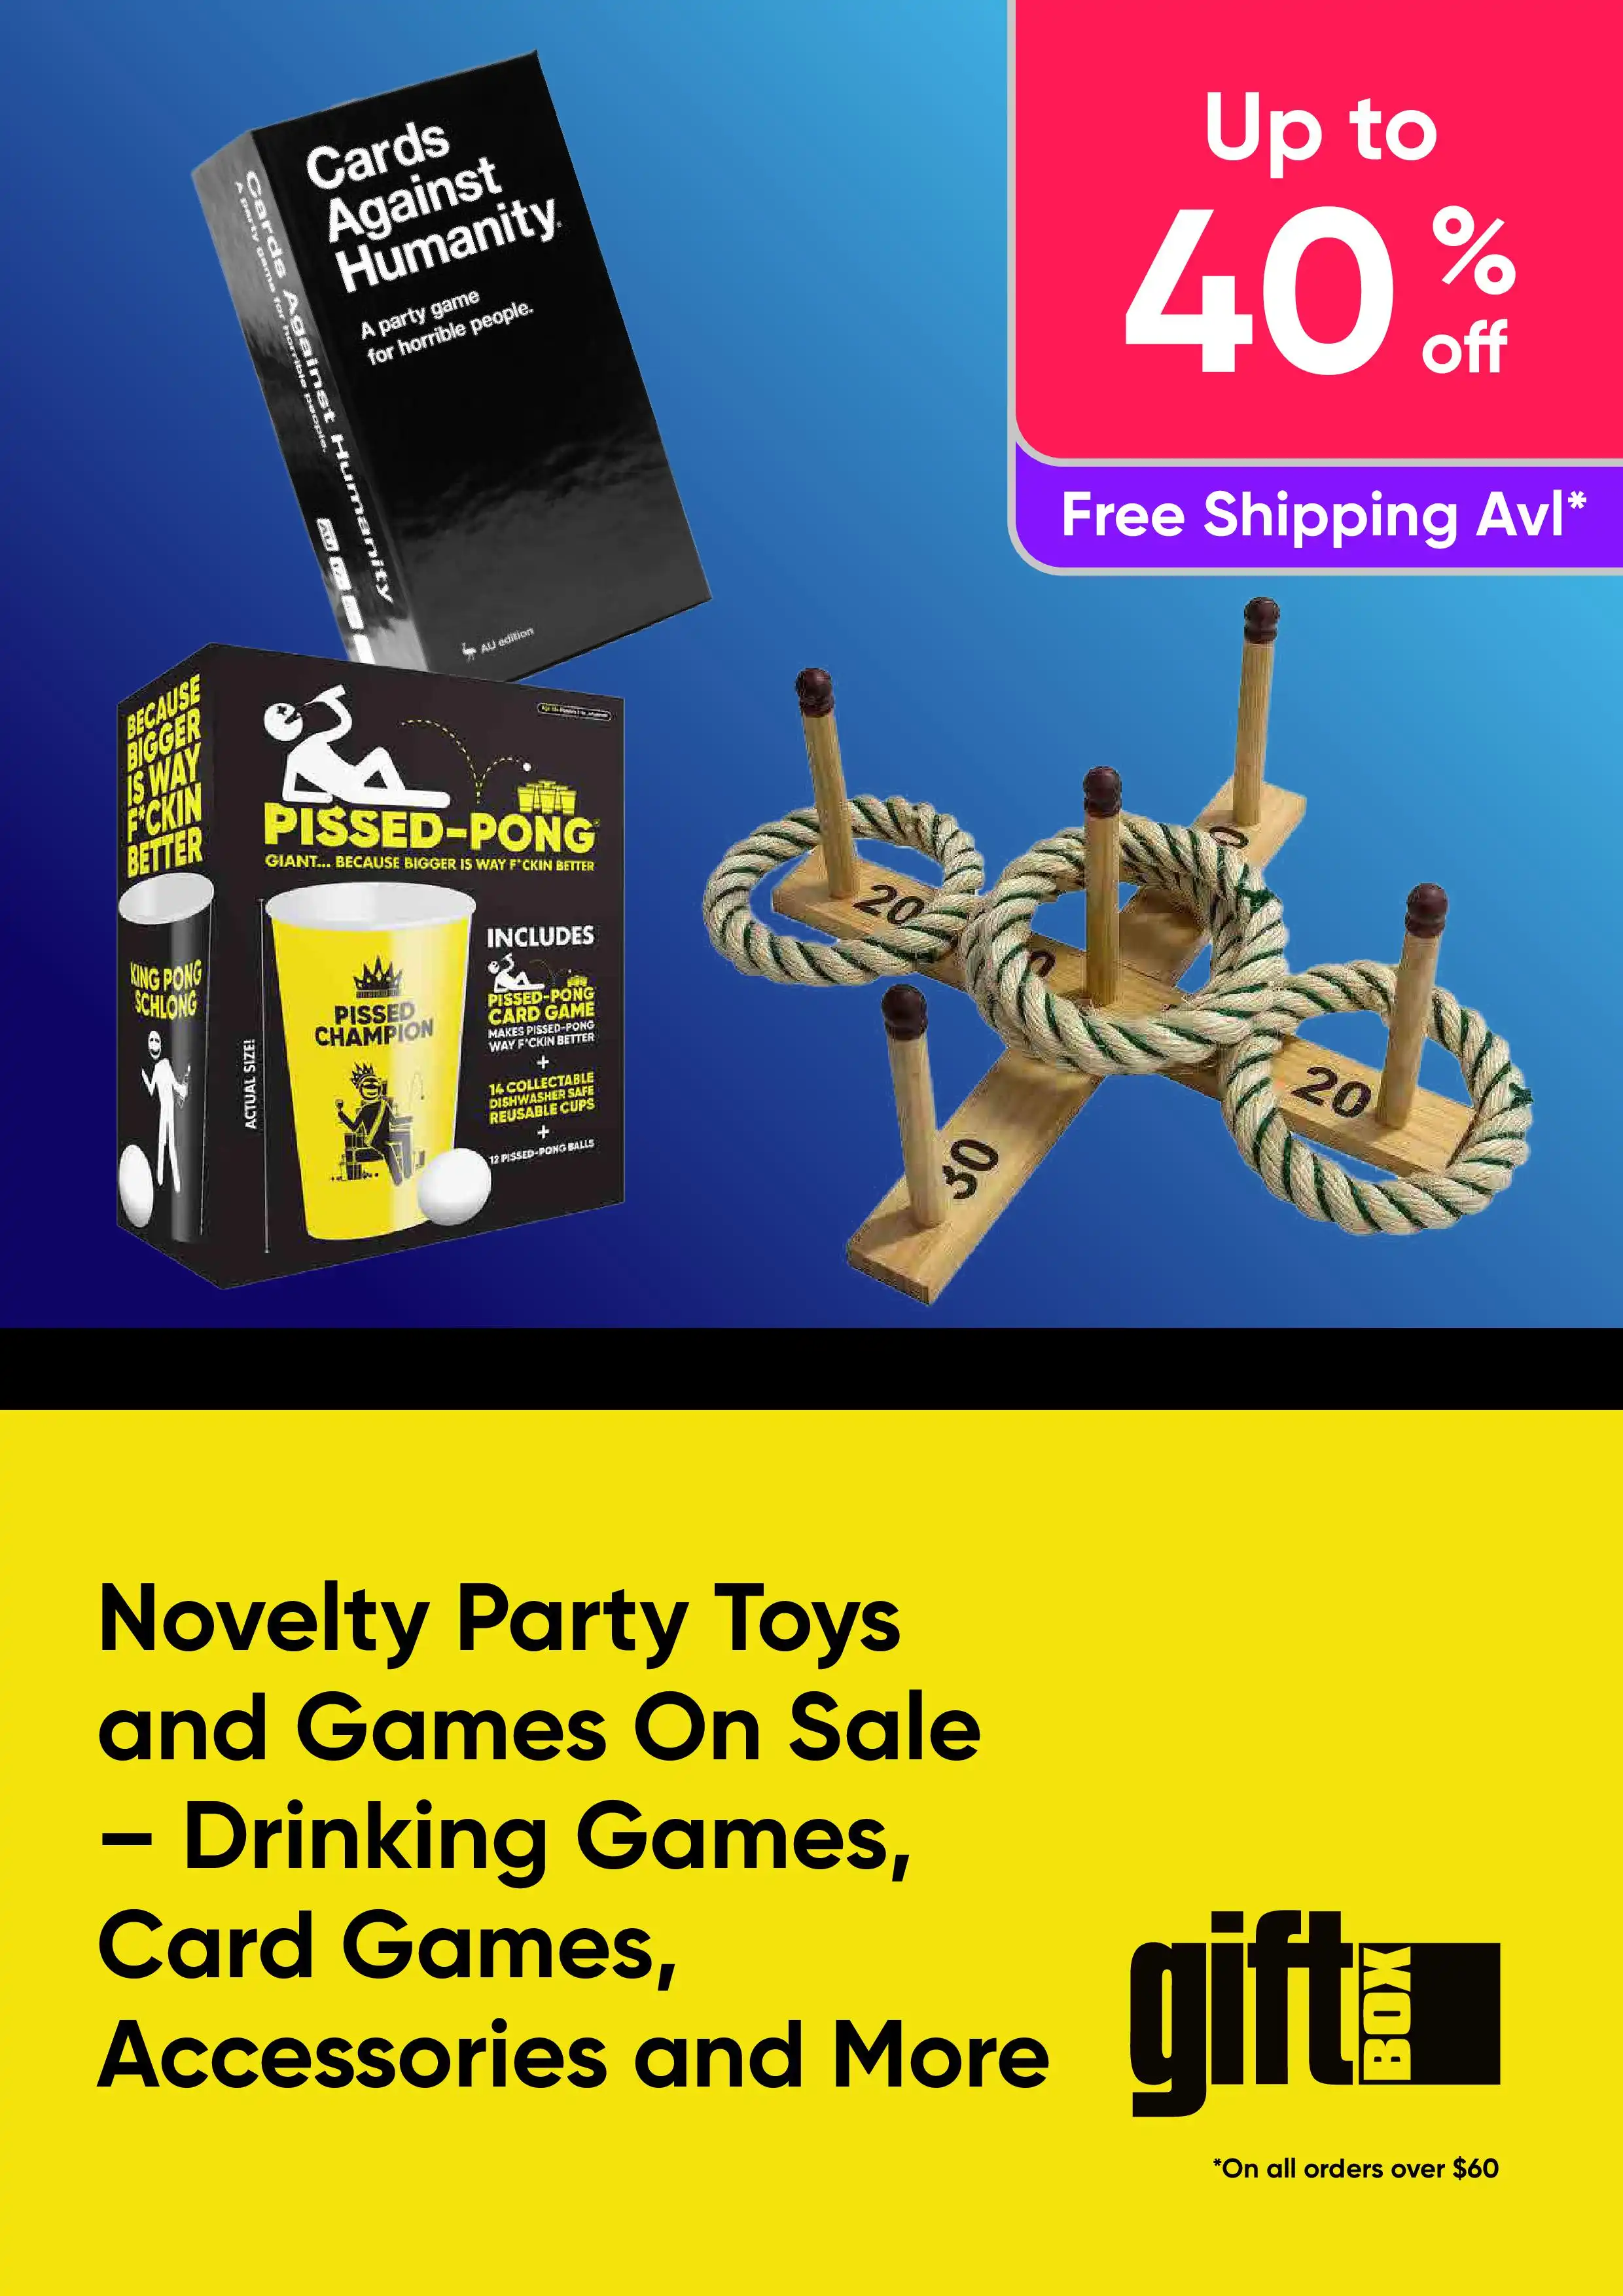 Novelty Party Toys and Games On Sale - Drinking Games, Card Games, Accessories and More - Up to 40% off